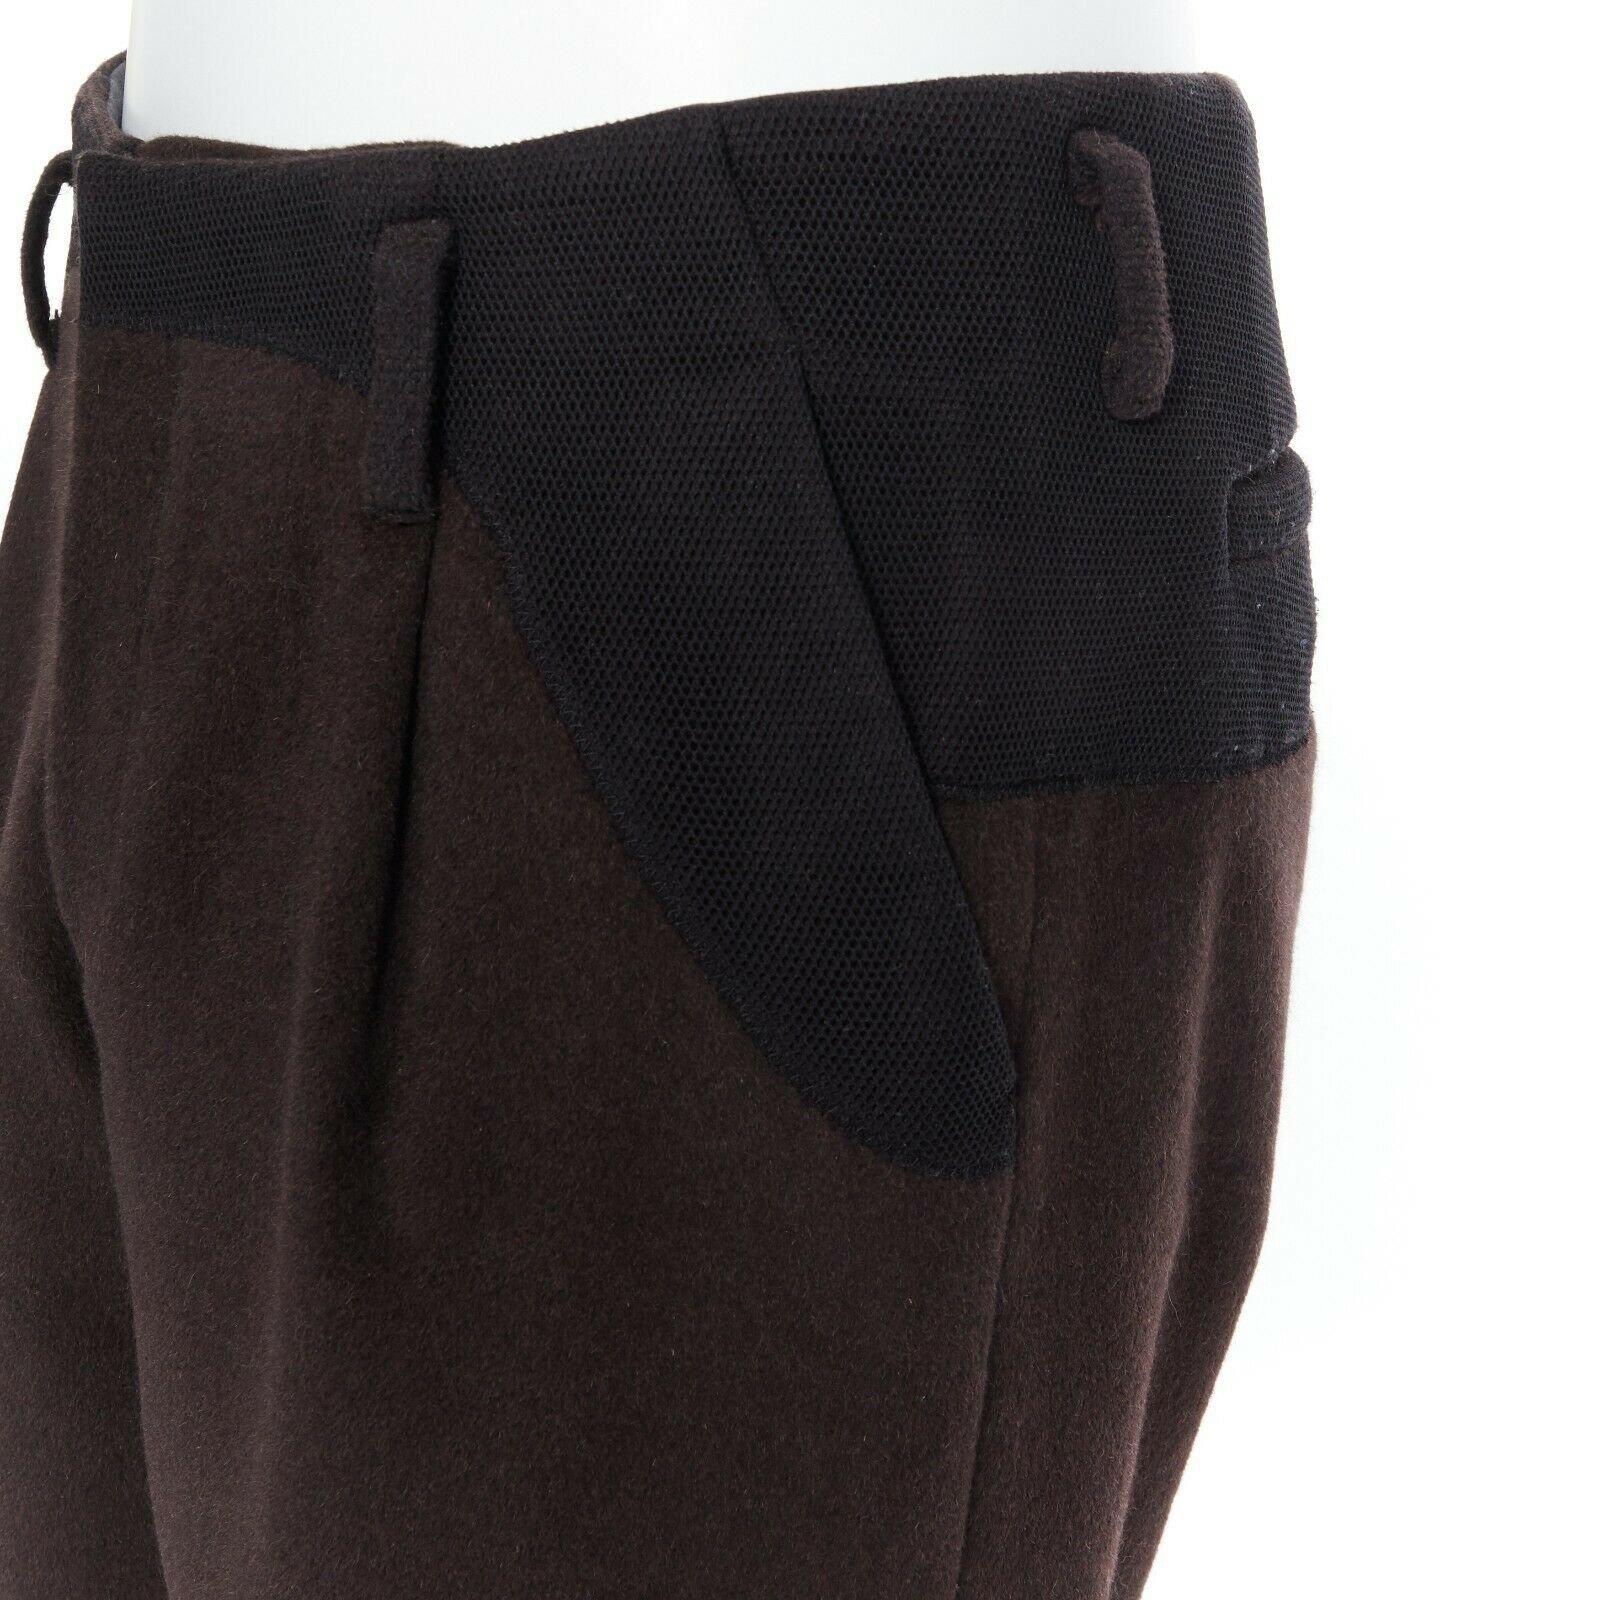 KOLOR men's dark brown mohair black mesh panels straight legged trousers pants 
Reference: ESWN/A00004 
Brand: Kolor 
Material: Unknown 
Color: Brown 
Pattern: Solid 
Closure: Zip 
Extra Detail: Straight legged trousers. Mesh panel at waist. 2 seam